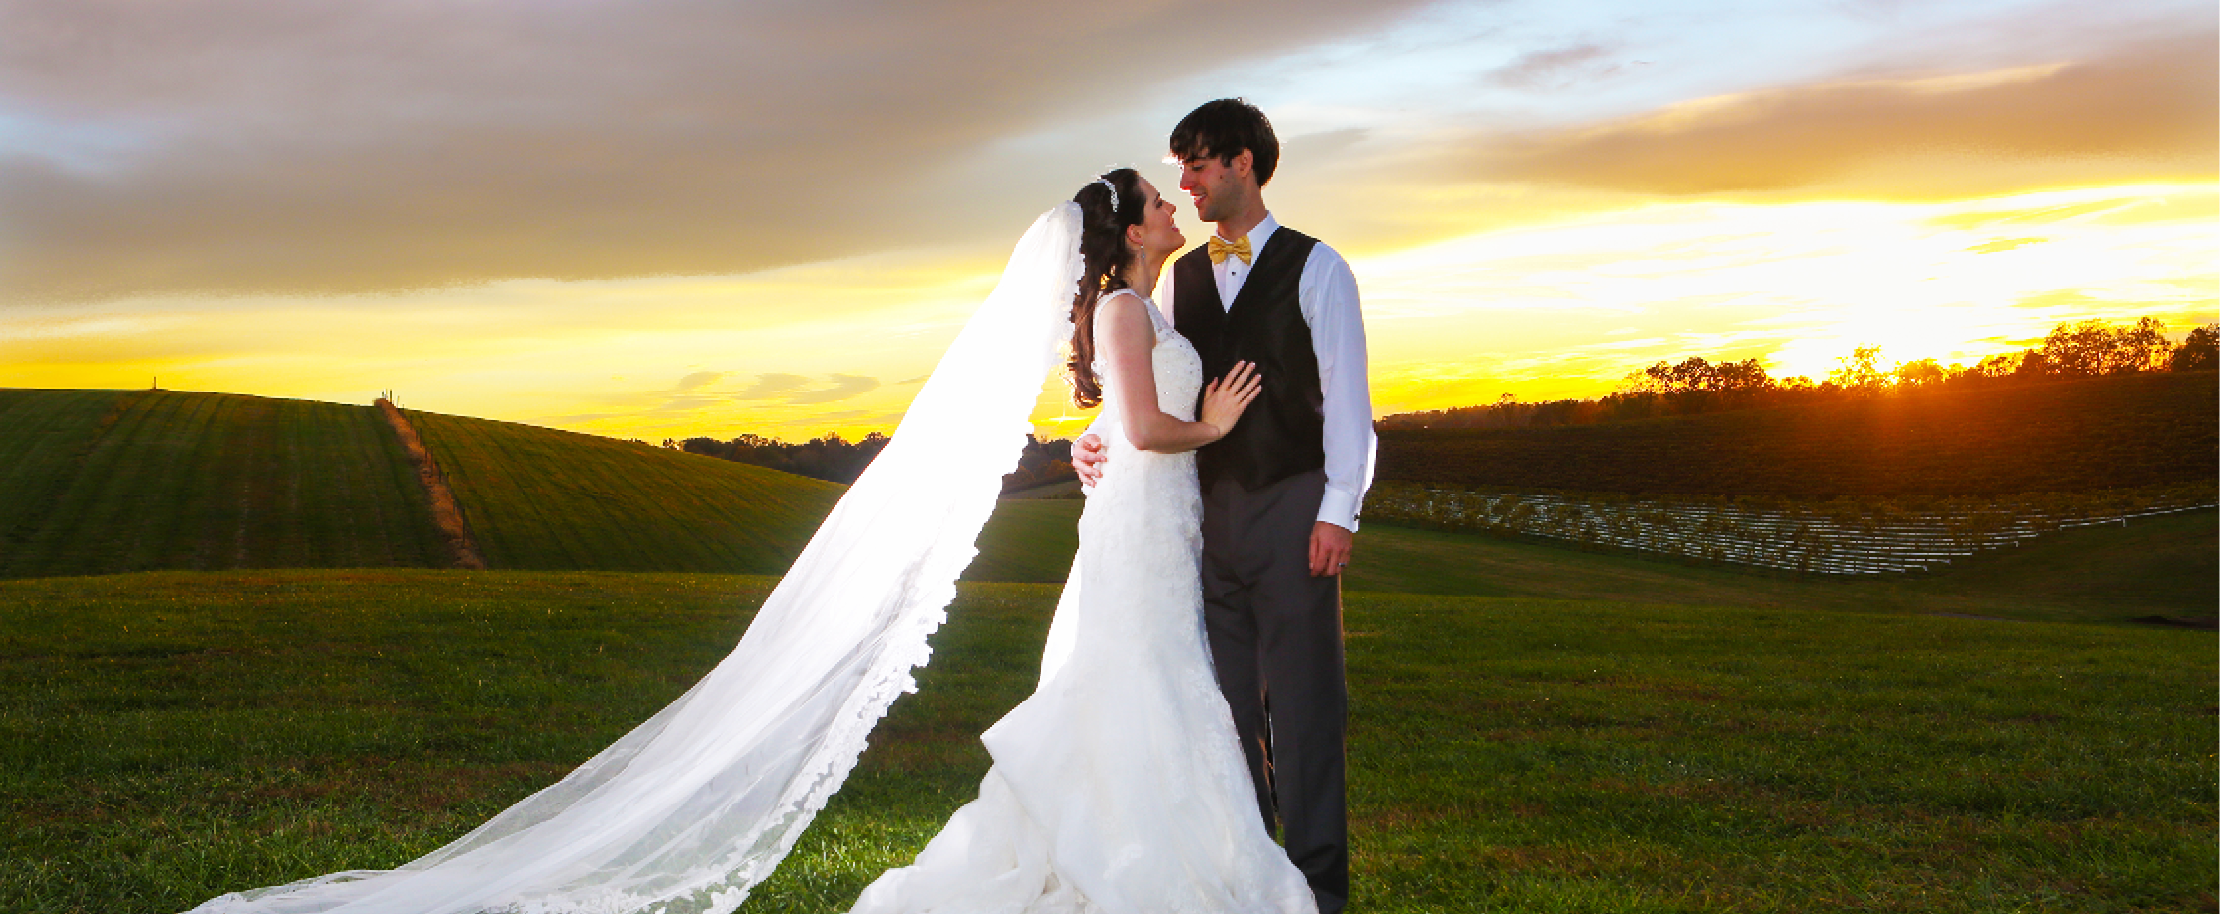 newly married couple in vineyards